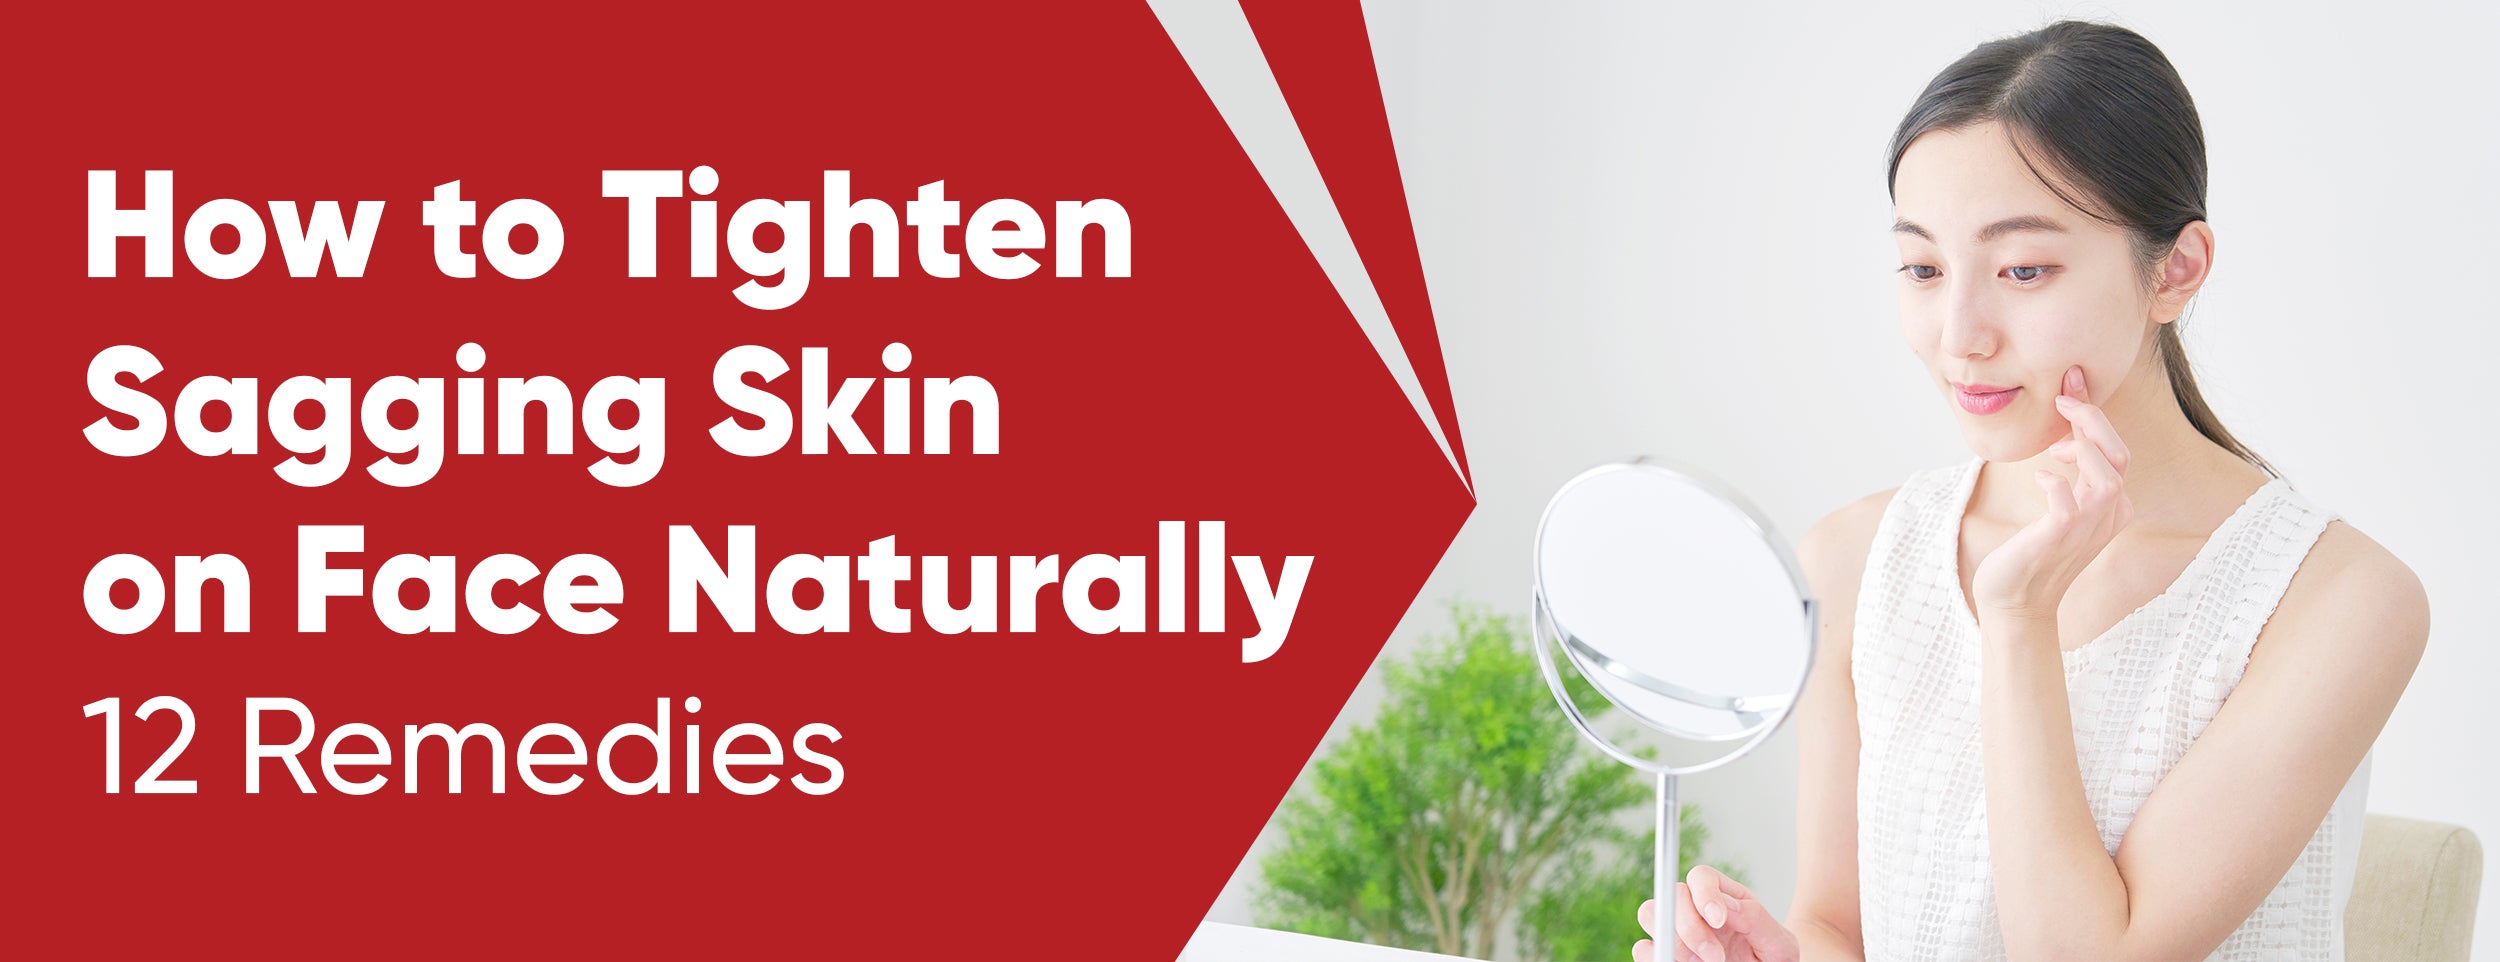 How to Tighten Sagging Skin on Face Naturally: 12 Remedies – Dr. Numb®